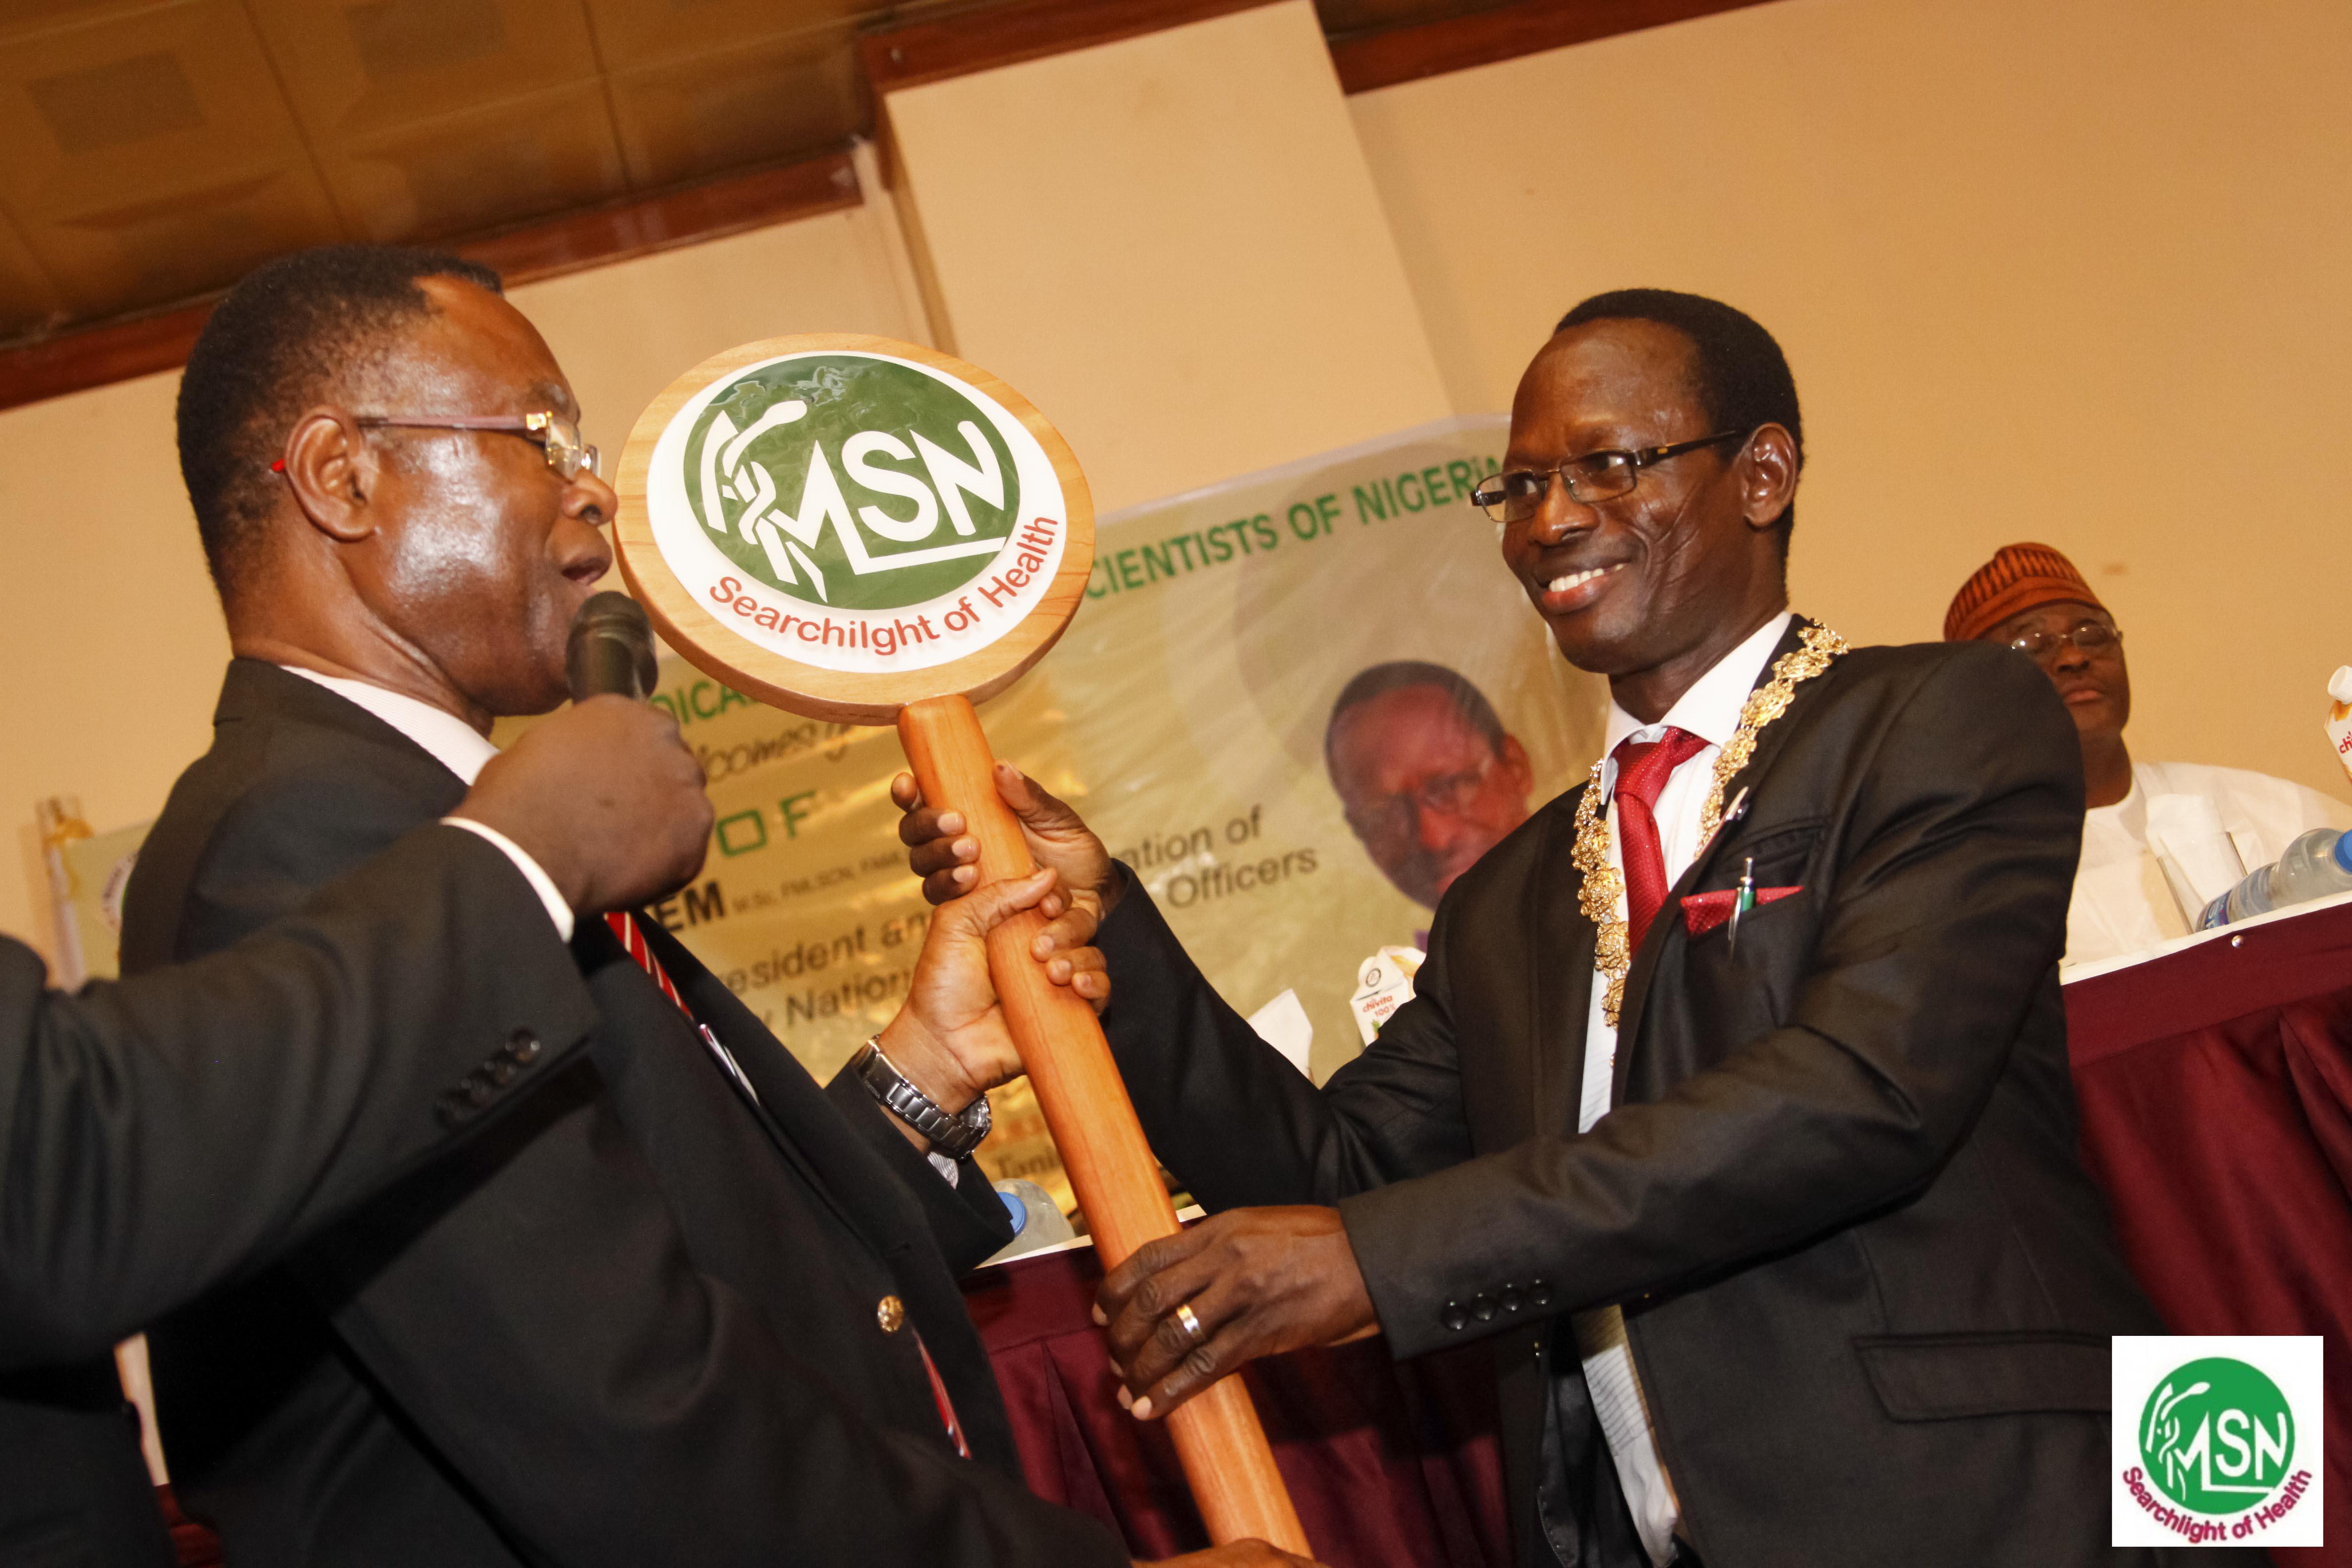 ACCEPTANCE SPEECH BY THE 12TH NATIONAL PRESIDENT OF AMLSN ALH TOYOSI Y RAHEEM ON THE OCCASION OF THE INVESTITURE CEREMONY HELD AT THE ROCKVIEW HOTEL, ABUJA ON THE 12TH DECEMBER, 2014